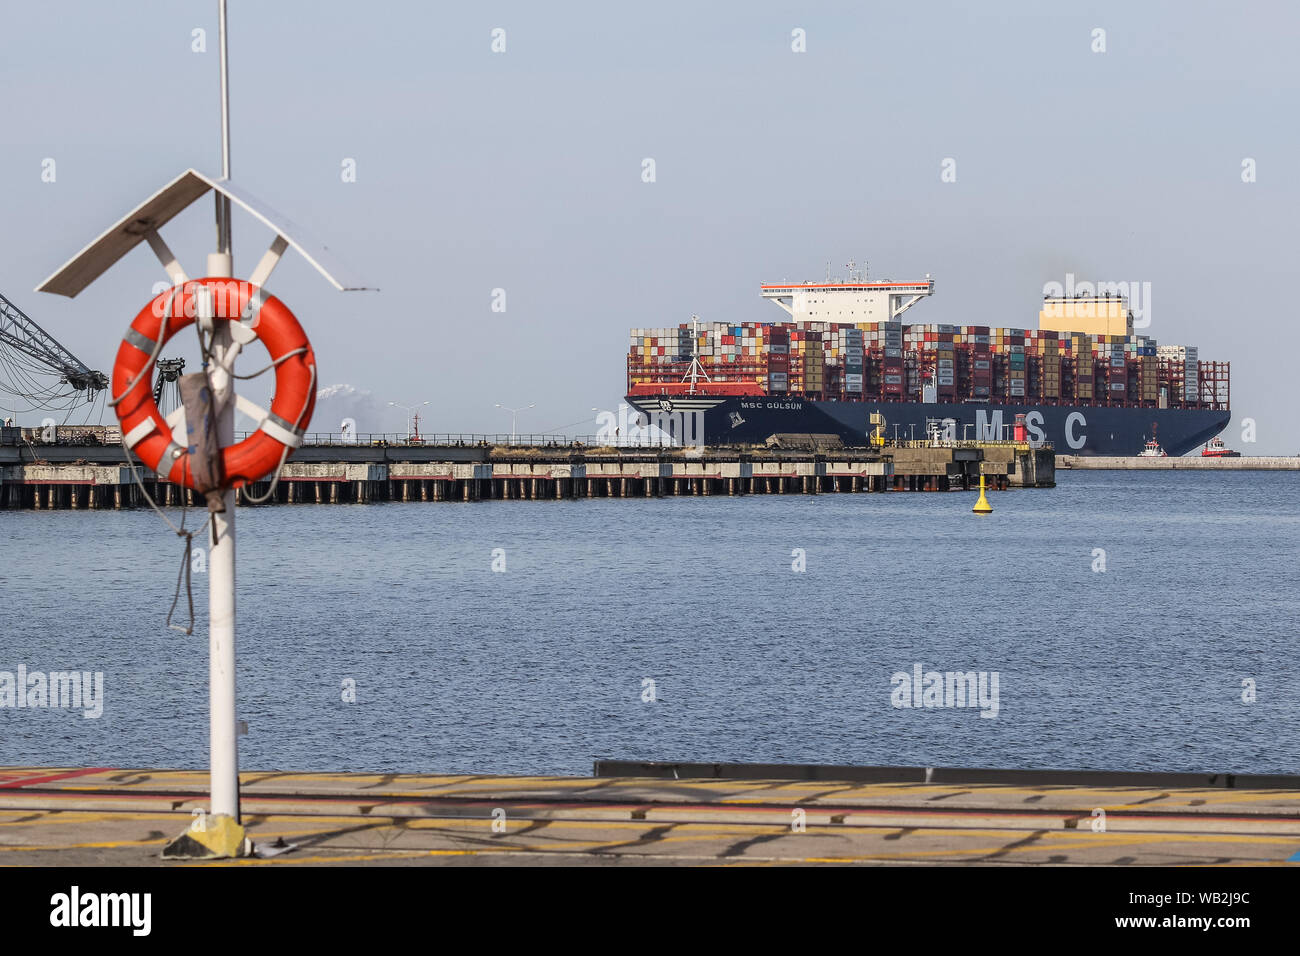 Gdansk, Poland. 23rd, August 2019  MSC Gulsun, current the world's largest container ship (23,756 TEU) entering Deepwater Container Terminal (DCT) is seen. MSC Gulsun sailing under the flag of Panama, was built in 2019 and is 399.9 m long and 61.5 m width   © Vadim Pacajev / Alamy Live News Stock Photo